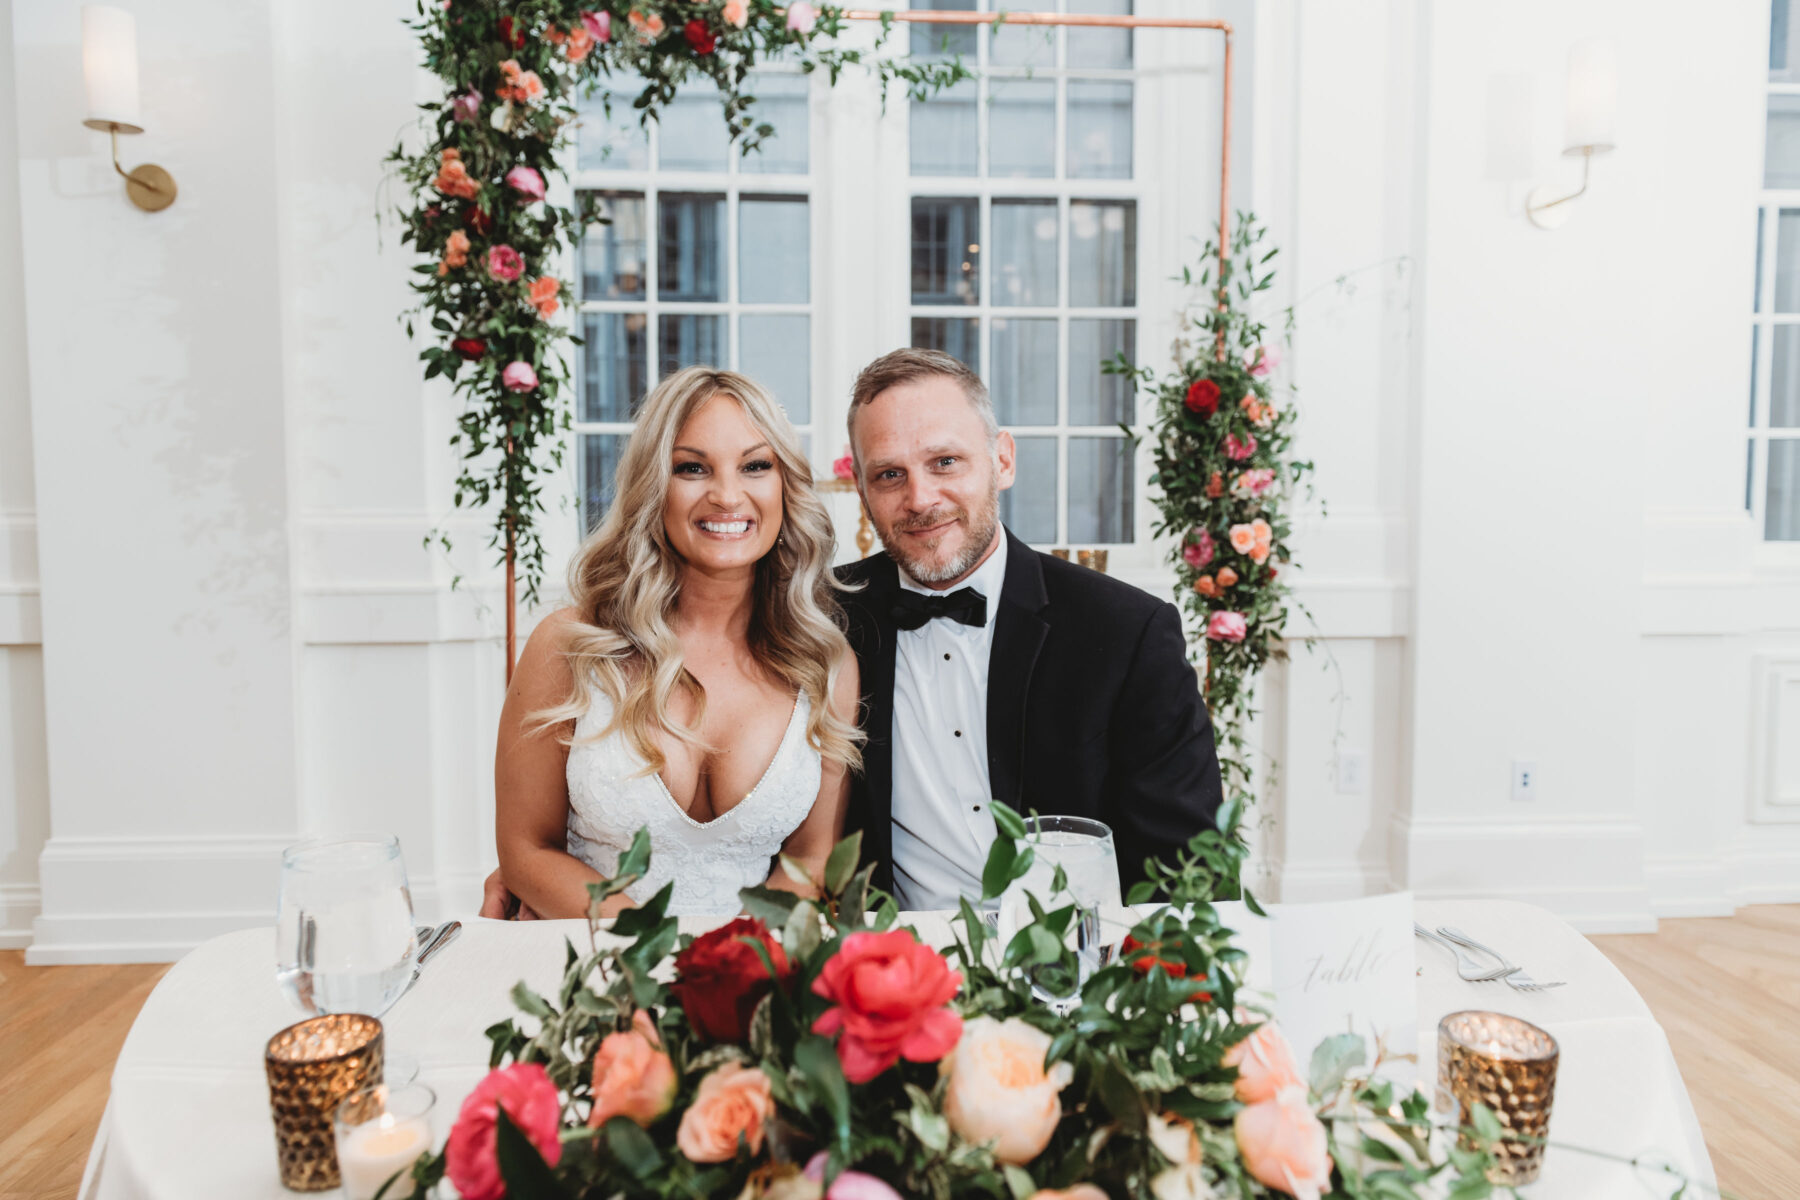 Coral and red floral wedding sweetheart table: Summer Tennessee Wedding at Noelle from Jayde J. Smith Events featured on Nashville Bride Guide